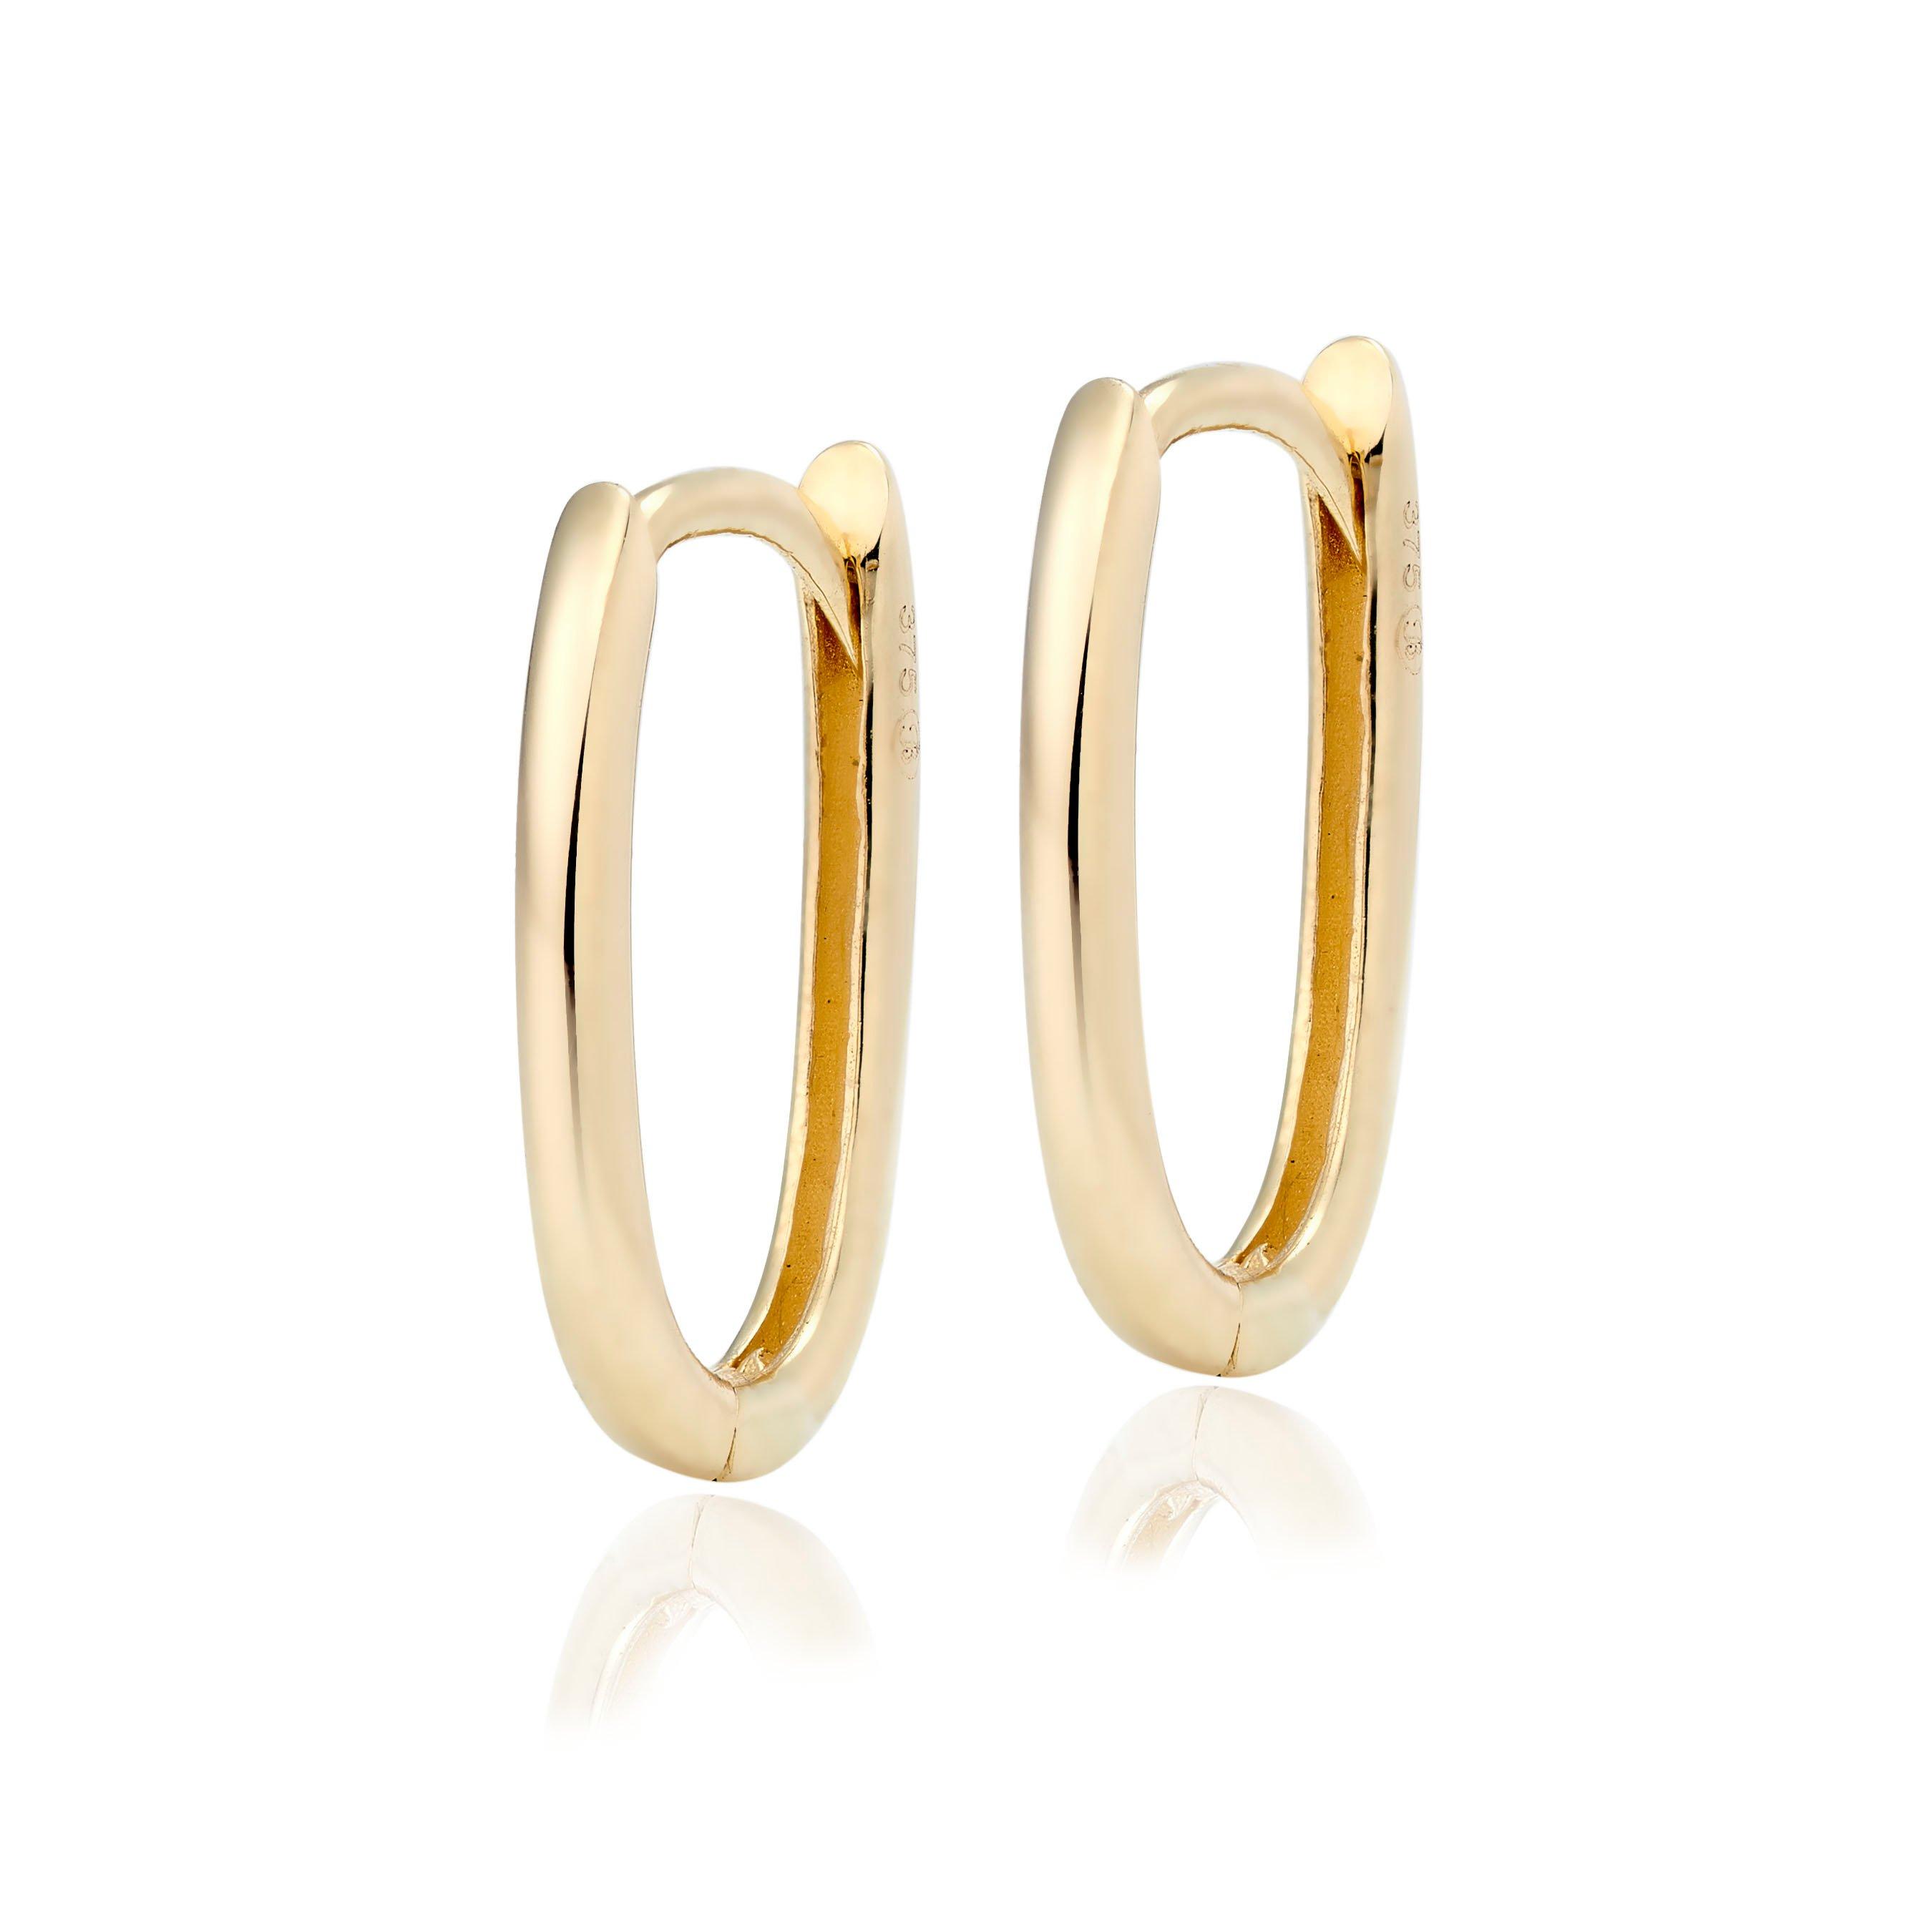 9ct Yellow Gold Oval Hoop earrings | 0130389 | Beaverbrooks the Jewellers